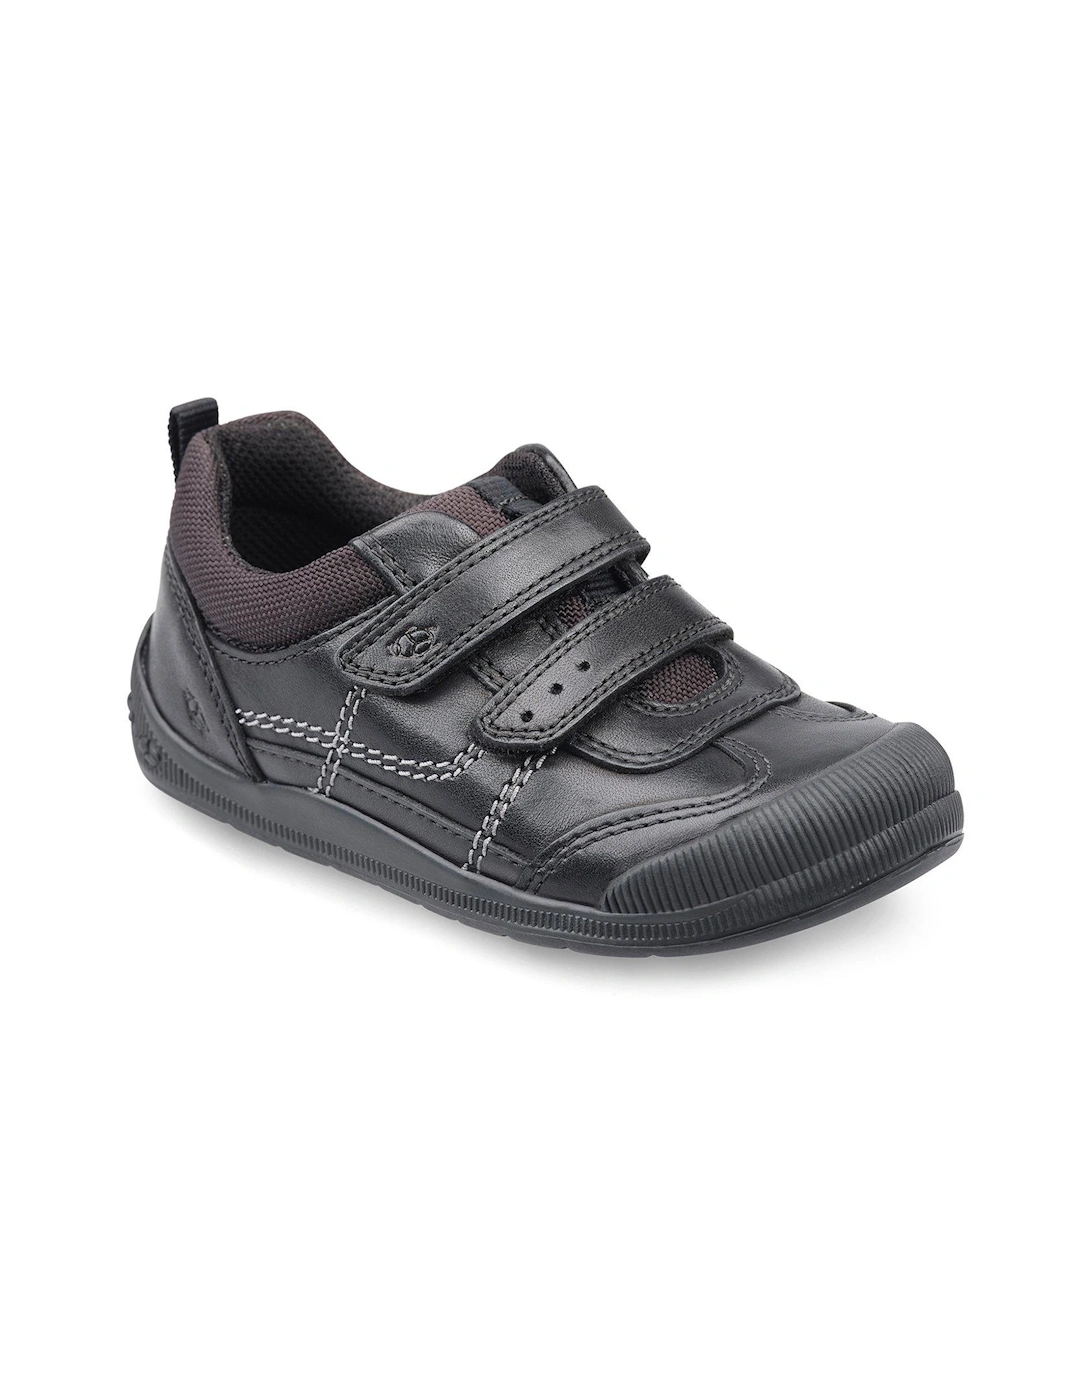 Boys Tickle Leather Riptape Durable First School Shoes - Black, 2 of 1